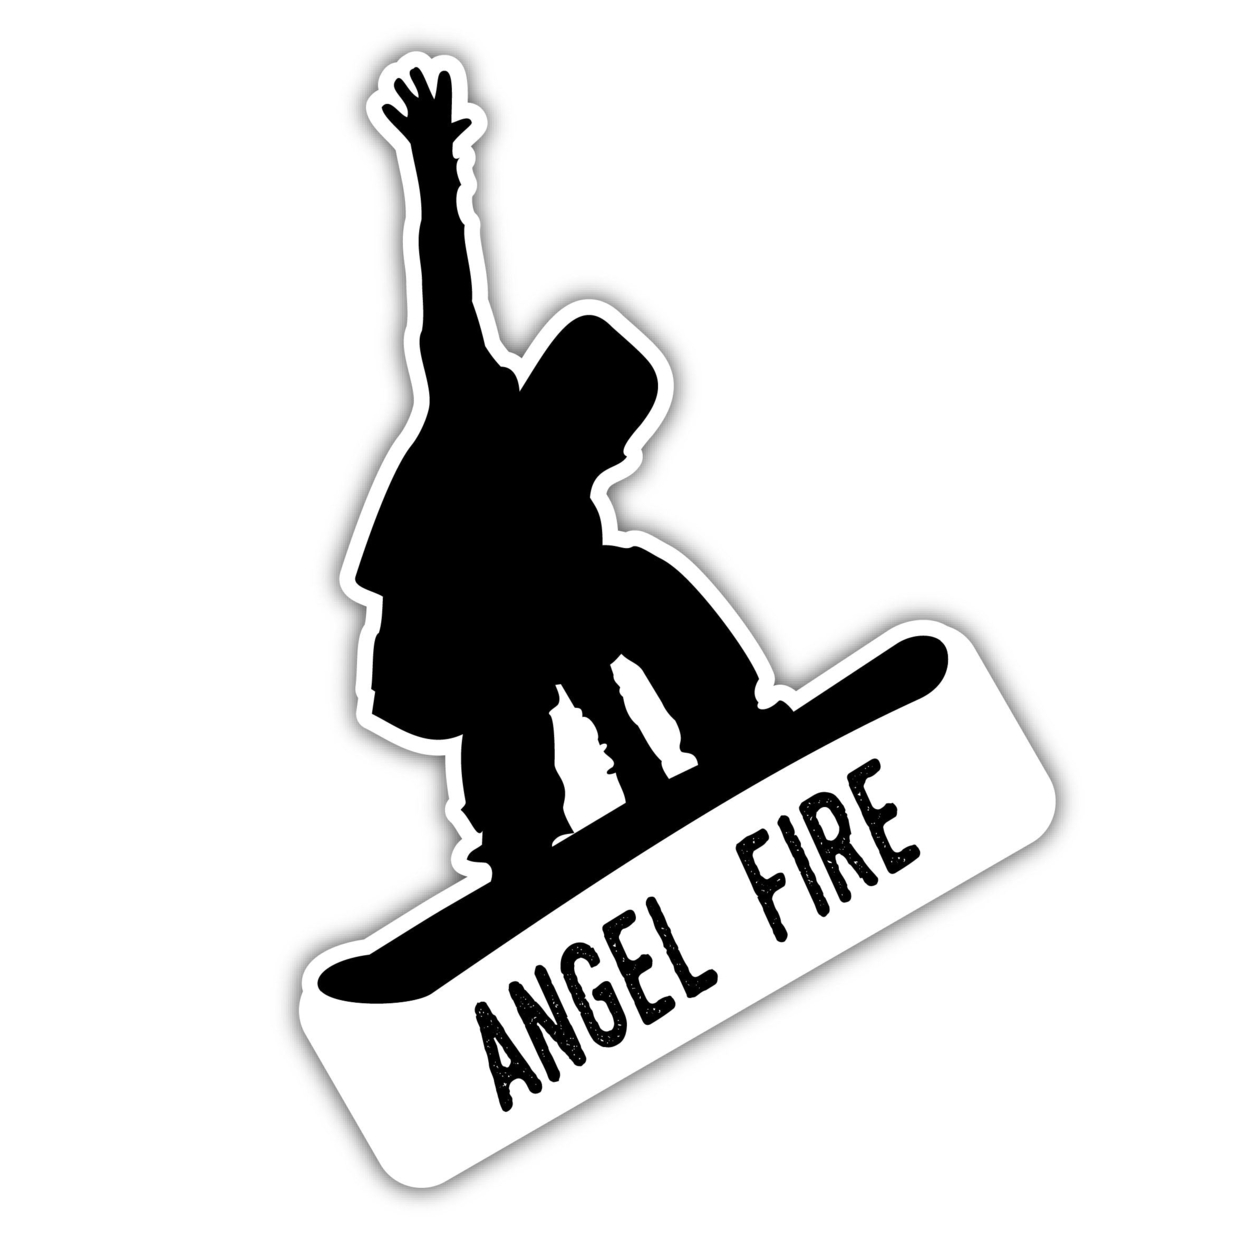 Angel Fire New Mexico Ski Adventures Souvenir Approximately 5 X 2.5-Inch Vinyl Decal Sticker Goggle Design